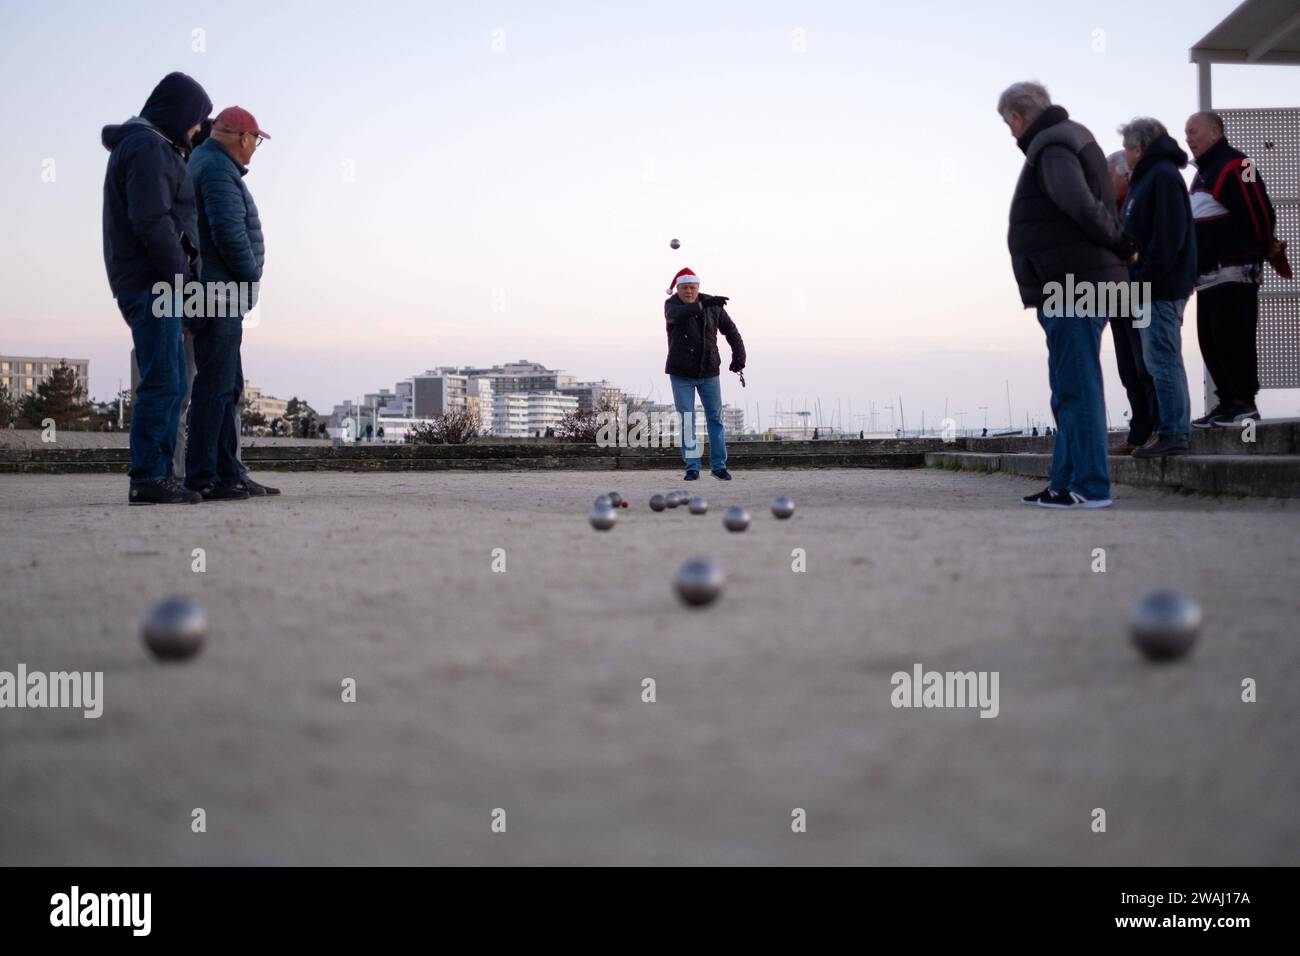 Petanquespieler am Strand von Le Havre in der Normandie. / Petanque players on the beach at Le Havre in Normandy. snapshot-photography/K.M.Krause *** Petanque players on the beach at Le Havre in Normandy Petanque players on the beach at Le Havre in Normandy snapshot photography K M Krause Stock Photo